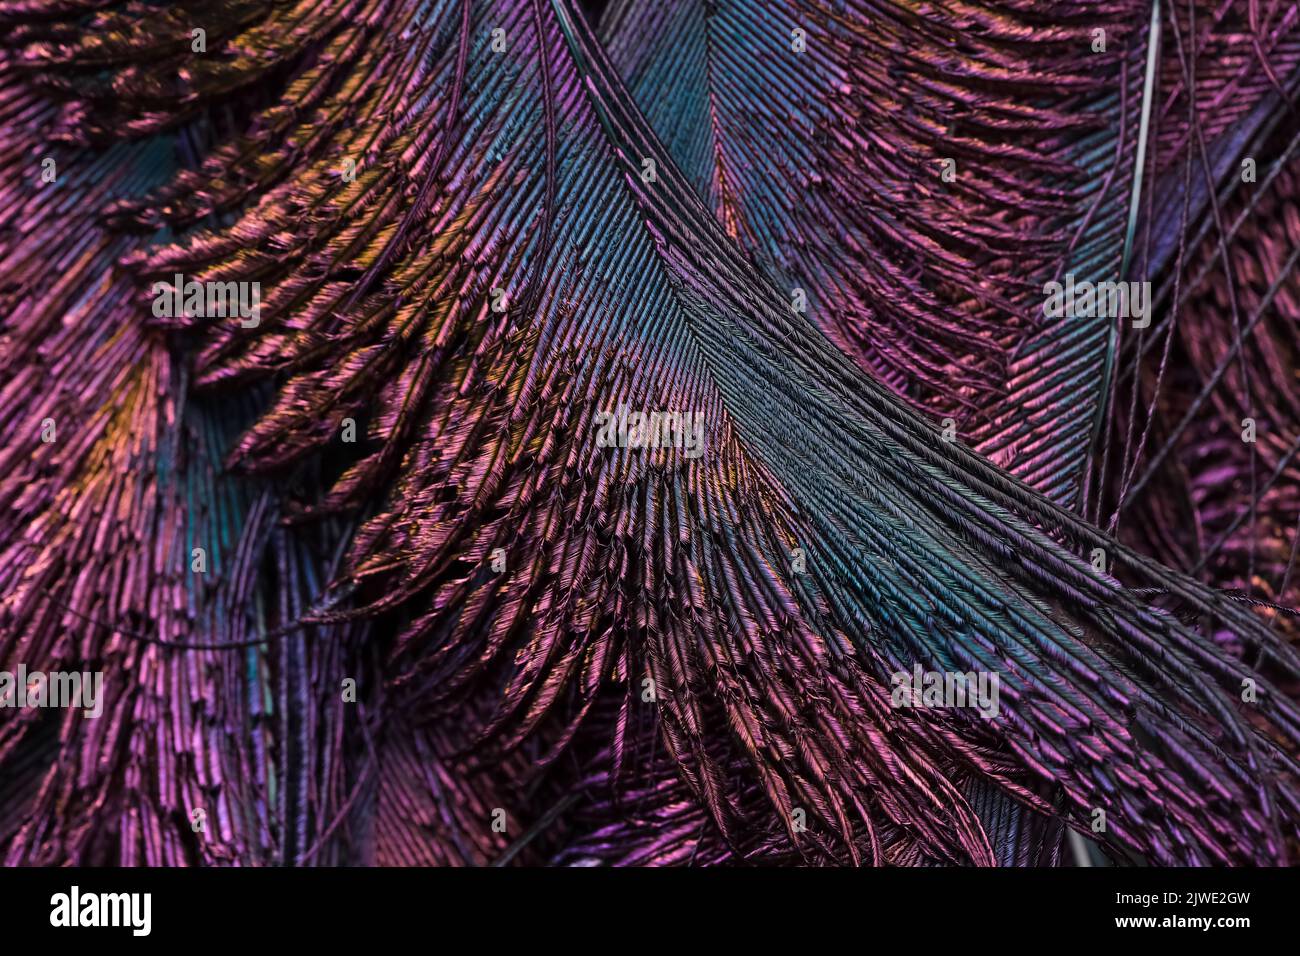 Beautiful and colorful bird feathers closeup abstract lines pattern texture natural background image concept, Beautiful bright color contrast image. Stock Photo